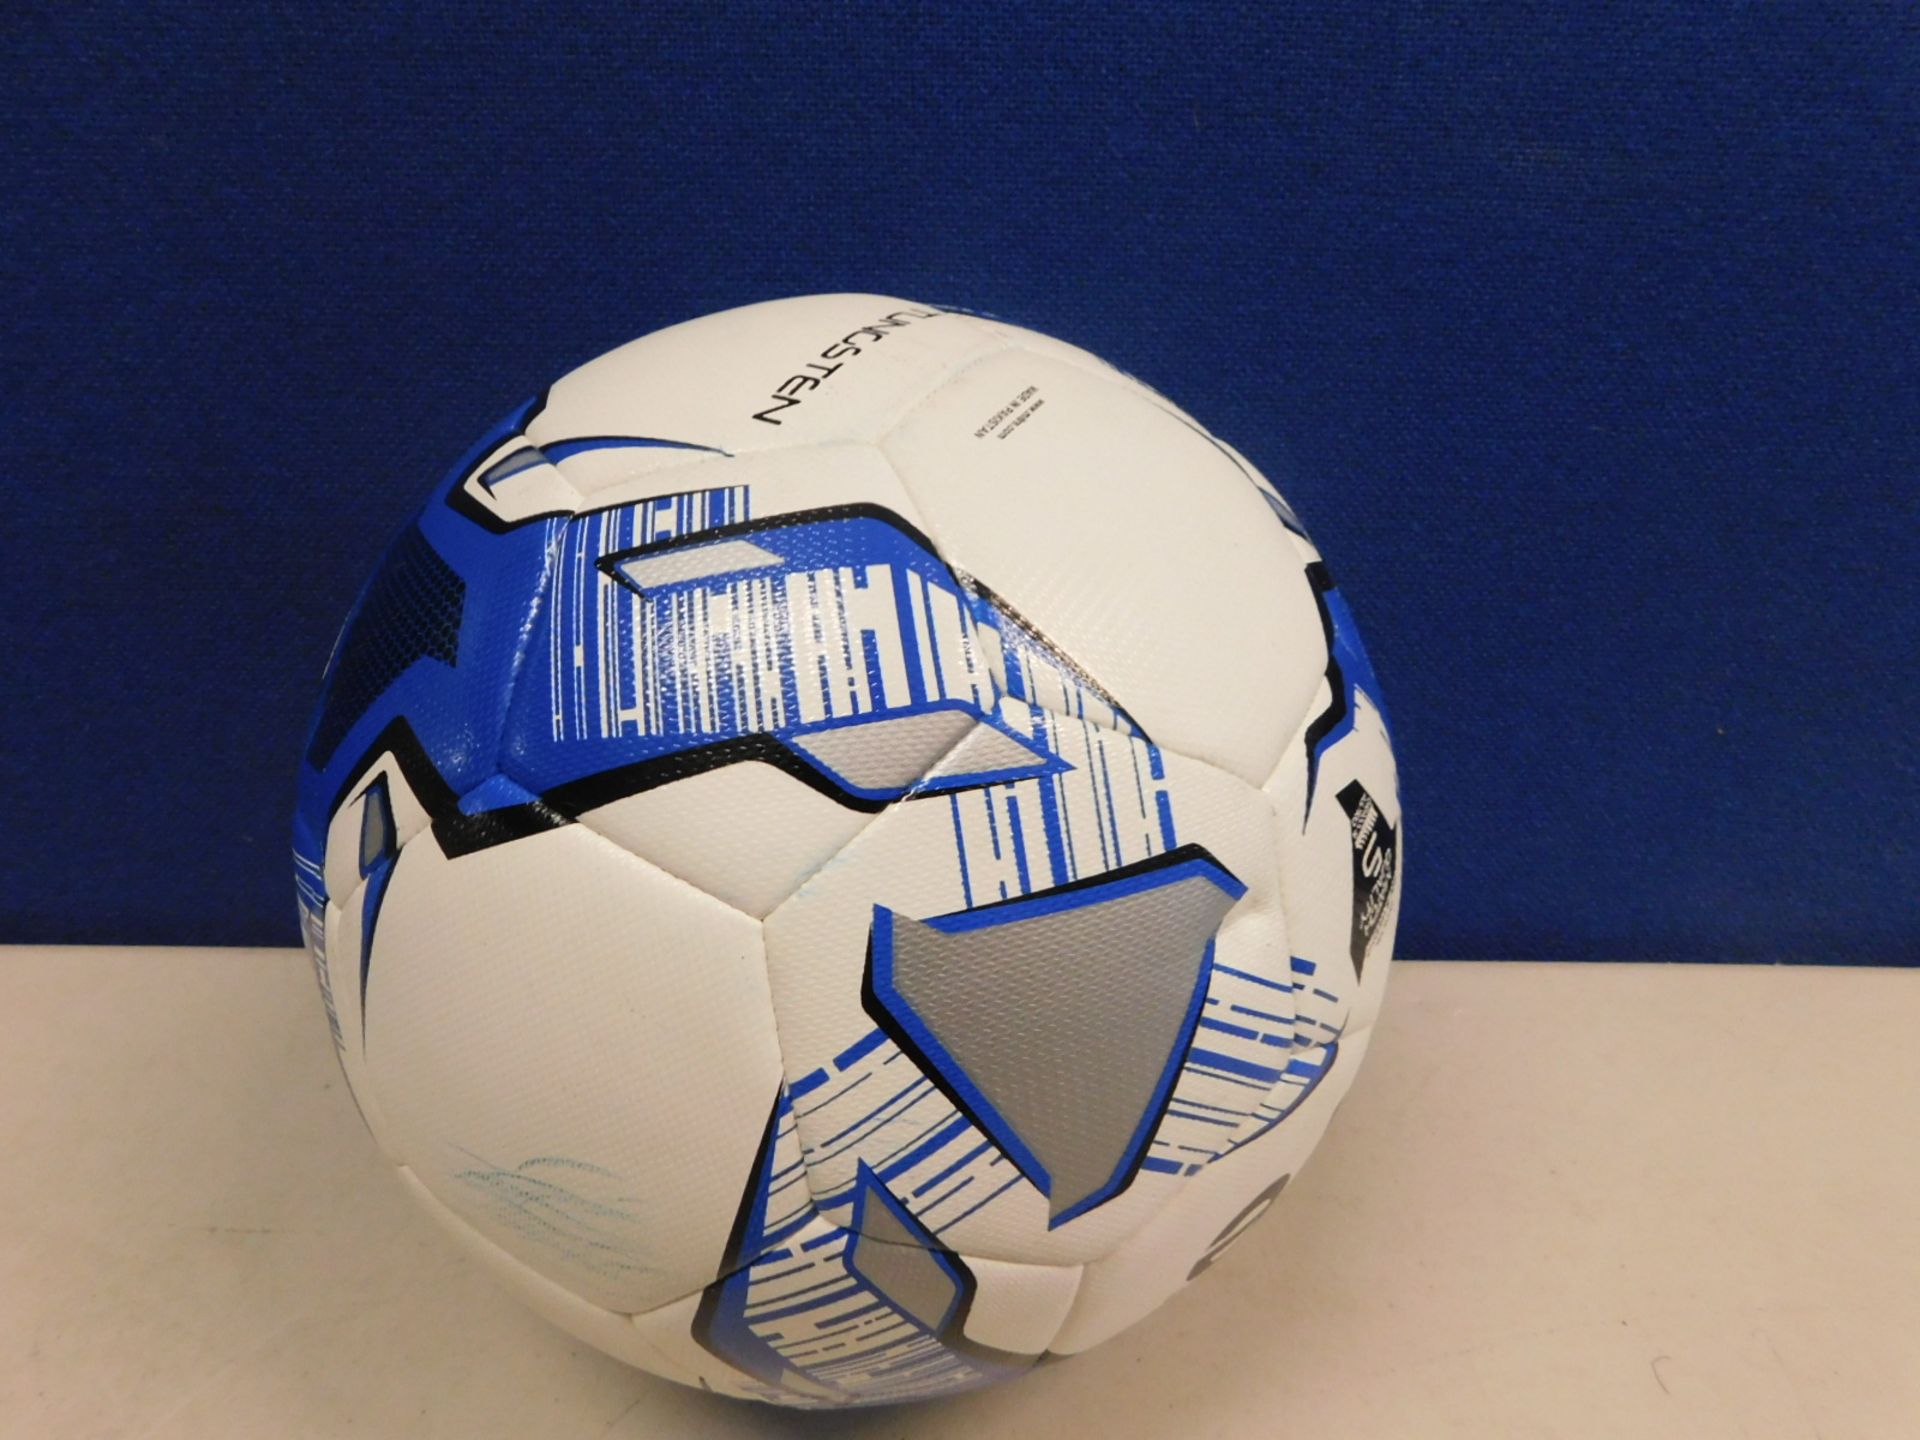 1 MITRE TUNGSTEN SIZE 5 FOOTBALL RRP £29.99